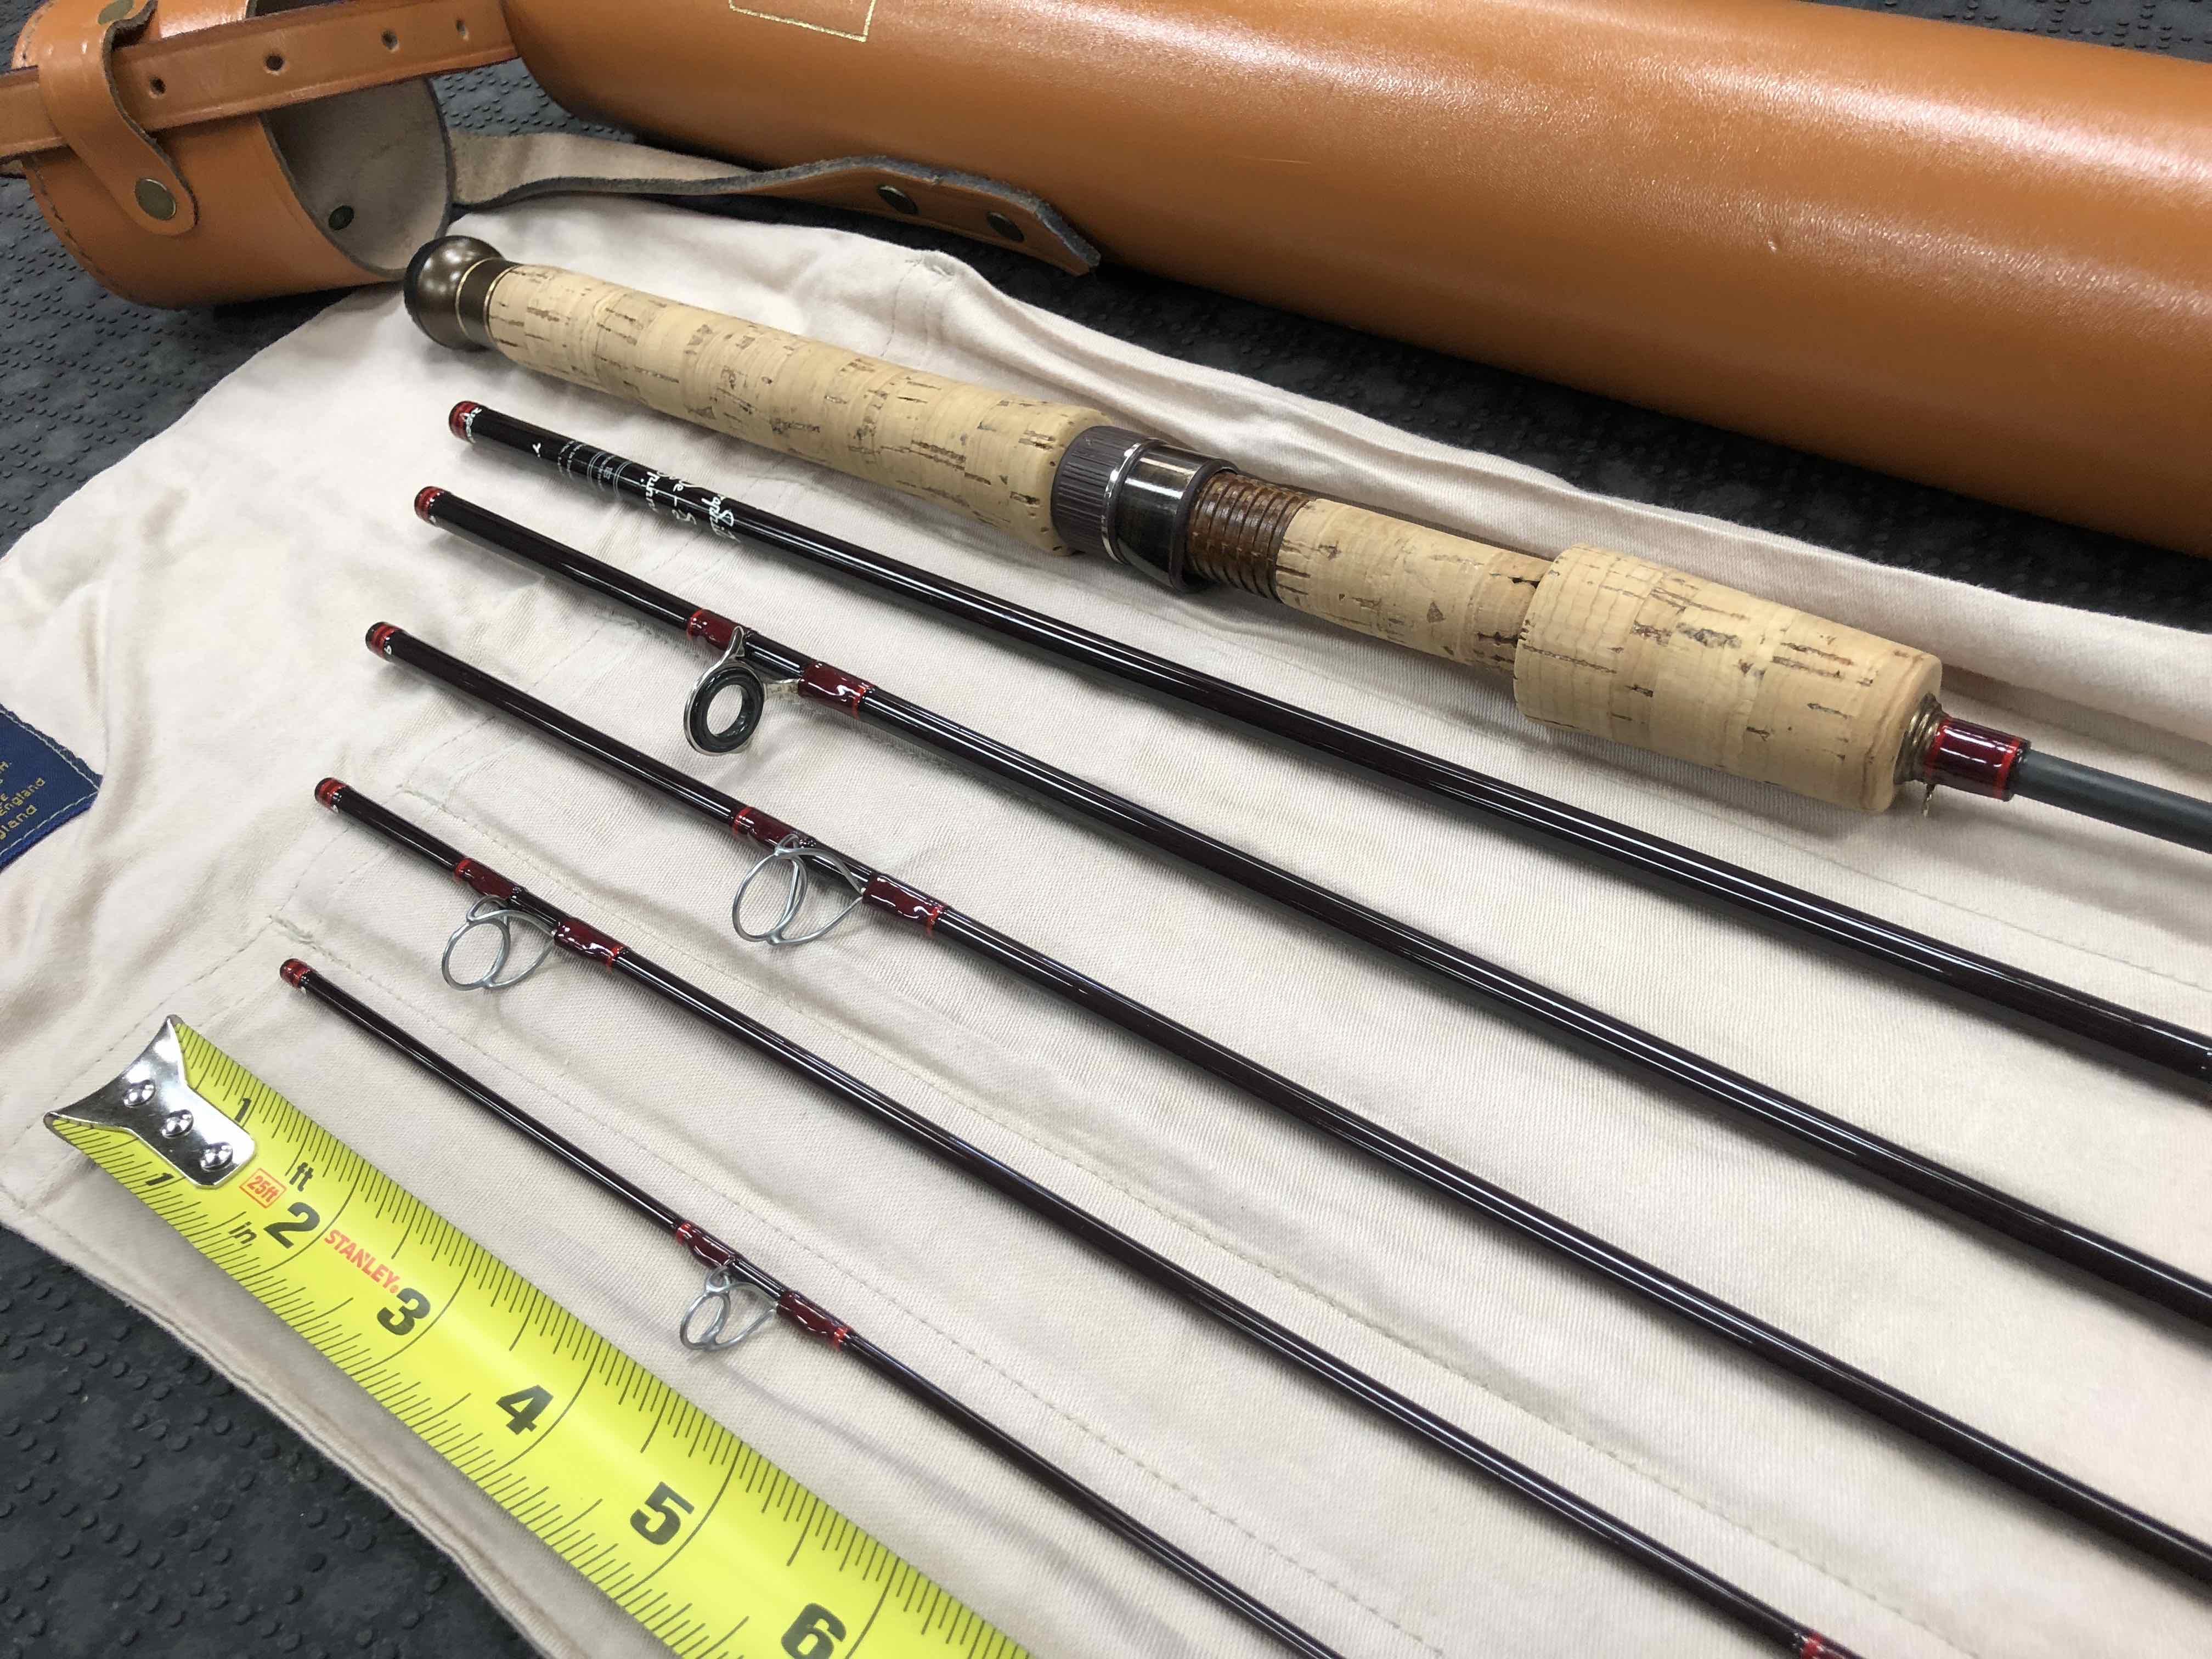 https://thefirstcast.ca/wp-content/uploads/2019/05/Hardy-Smuggler-6-piece-Graphite-De-Luxe-Spinning-Rod-7-foot-58-oz-Lure-Rating-cw-Original-Cloth-Bag-and-Leather-covered-Aluminum-Tube-AA.jpg